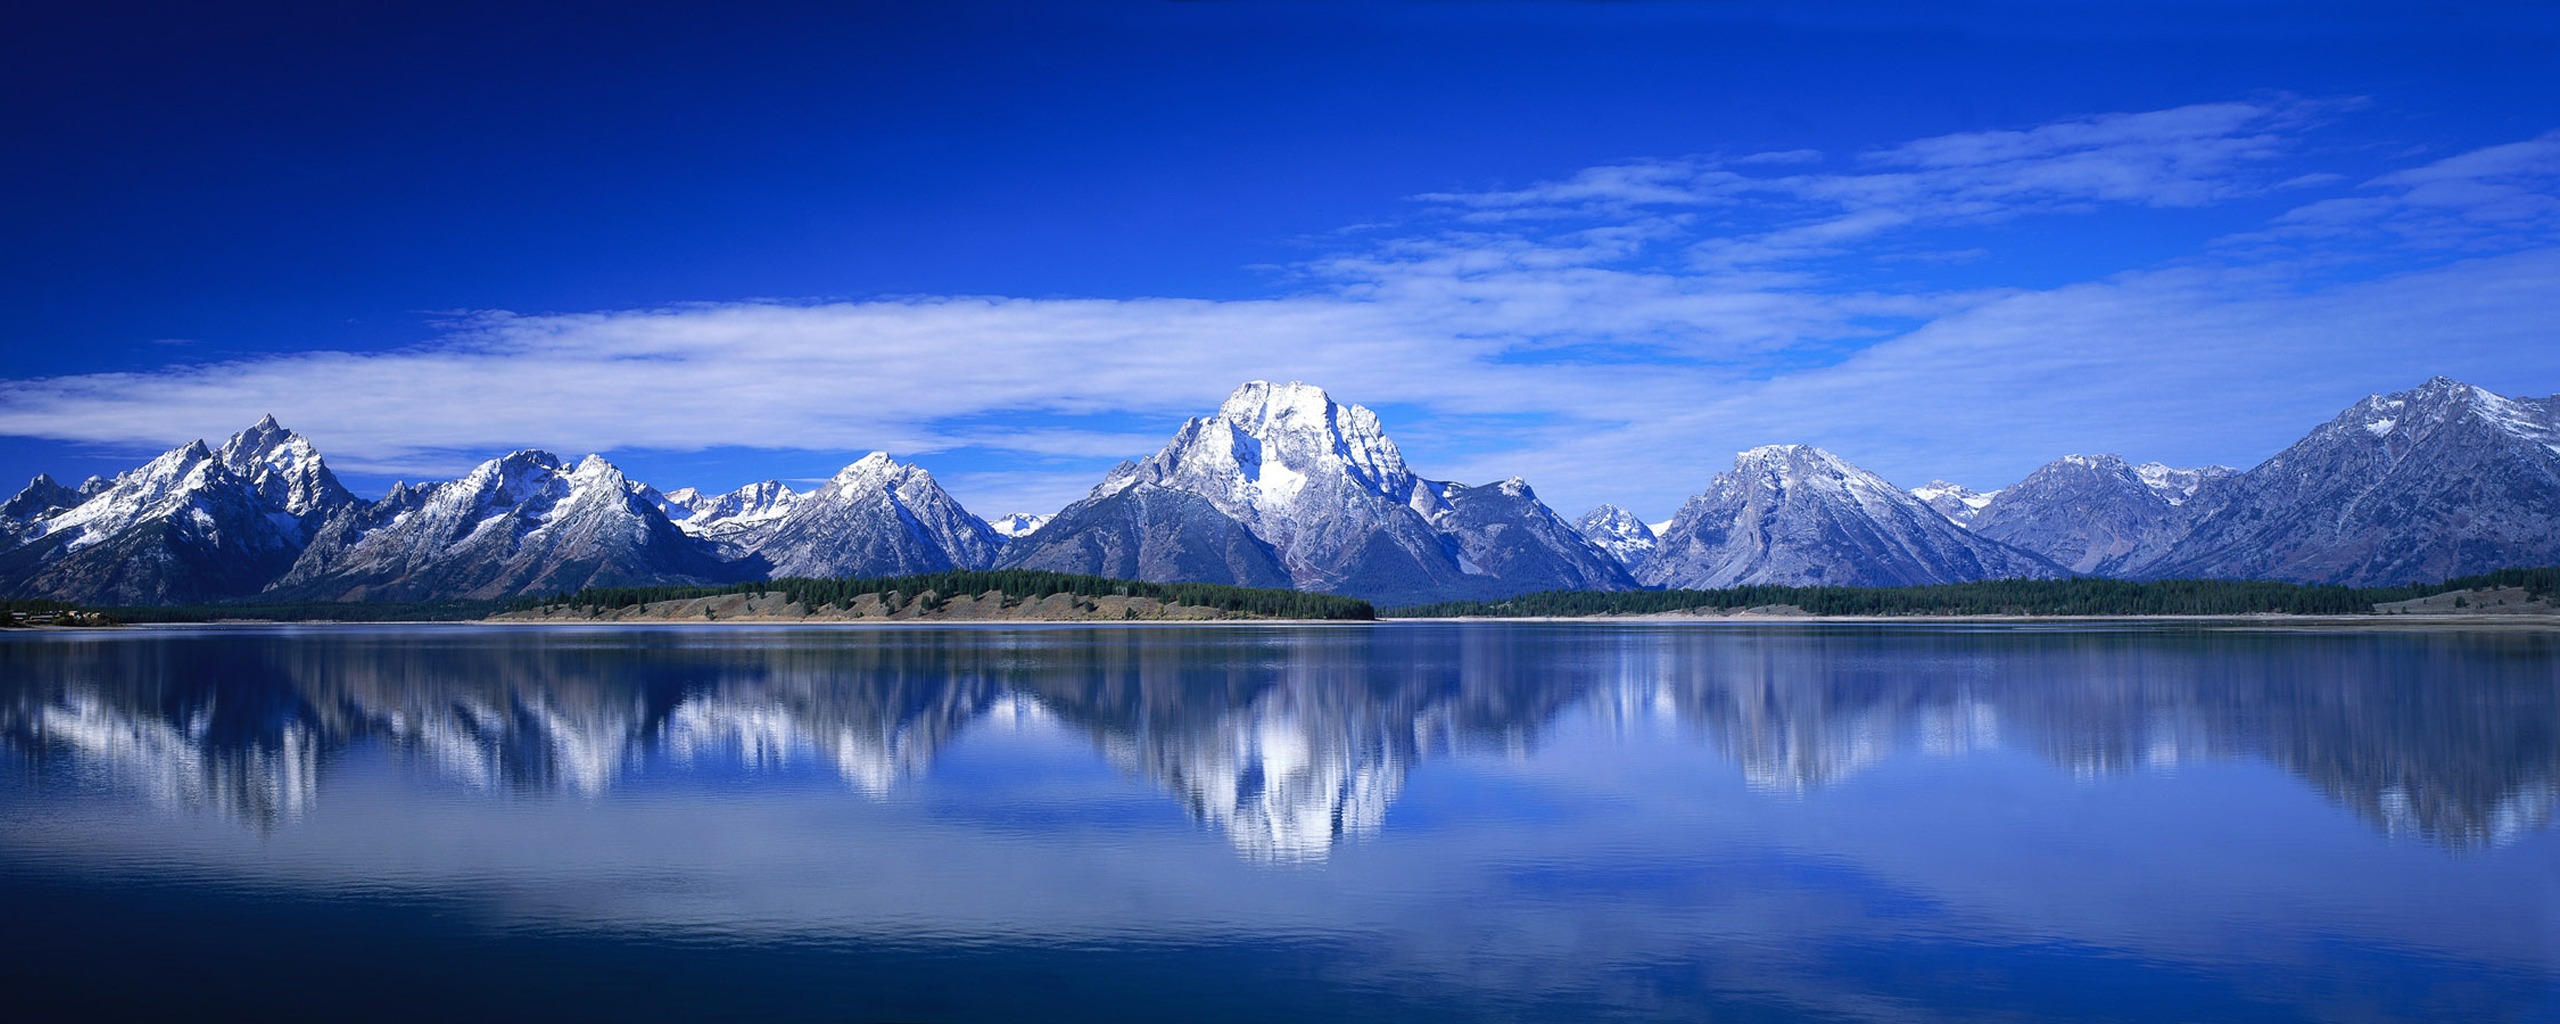 Mountain Widescreen HD Wallpapers Attachment 12516 - HD Wallpapers